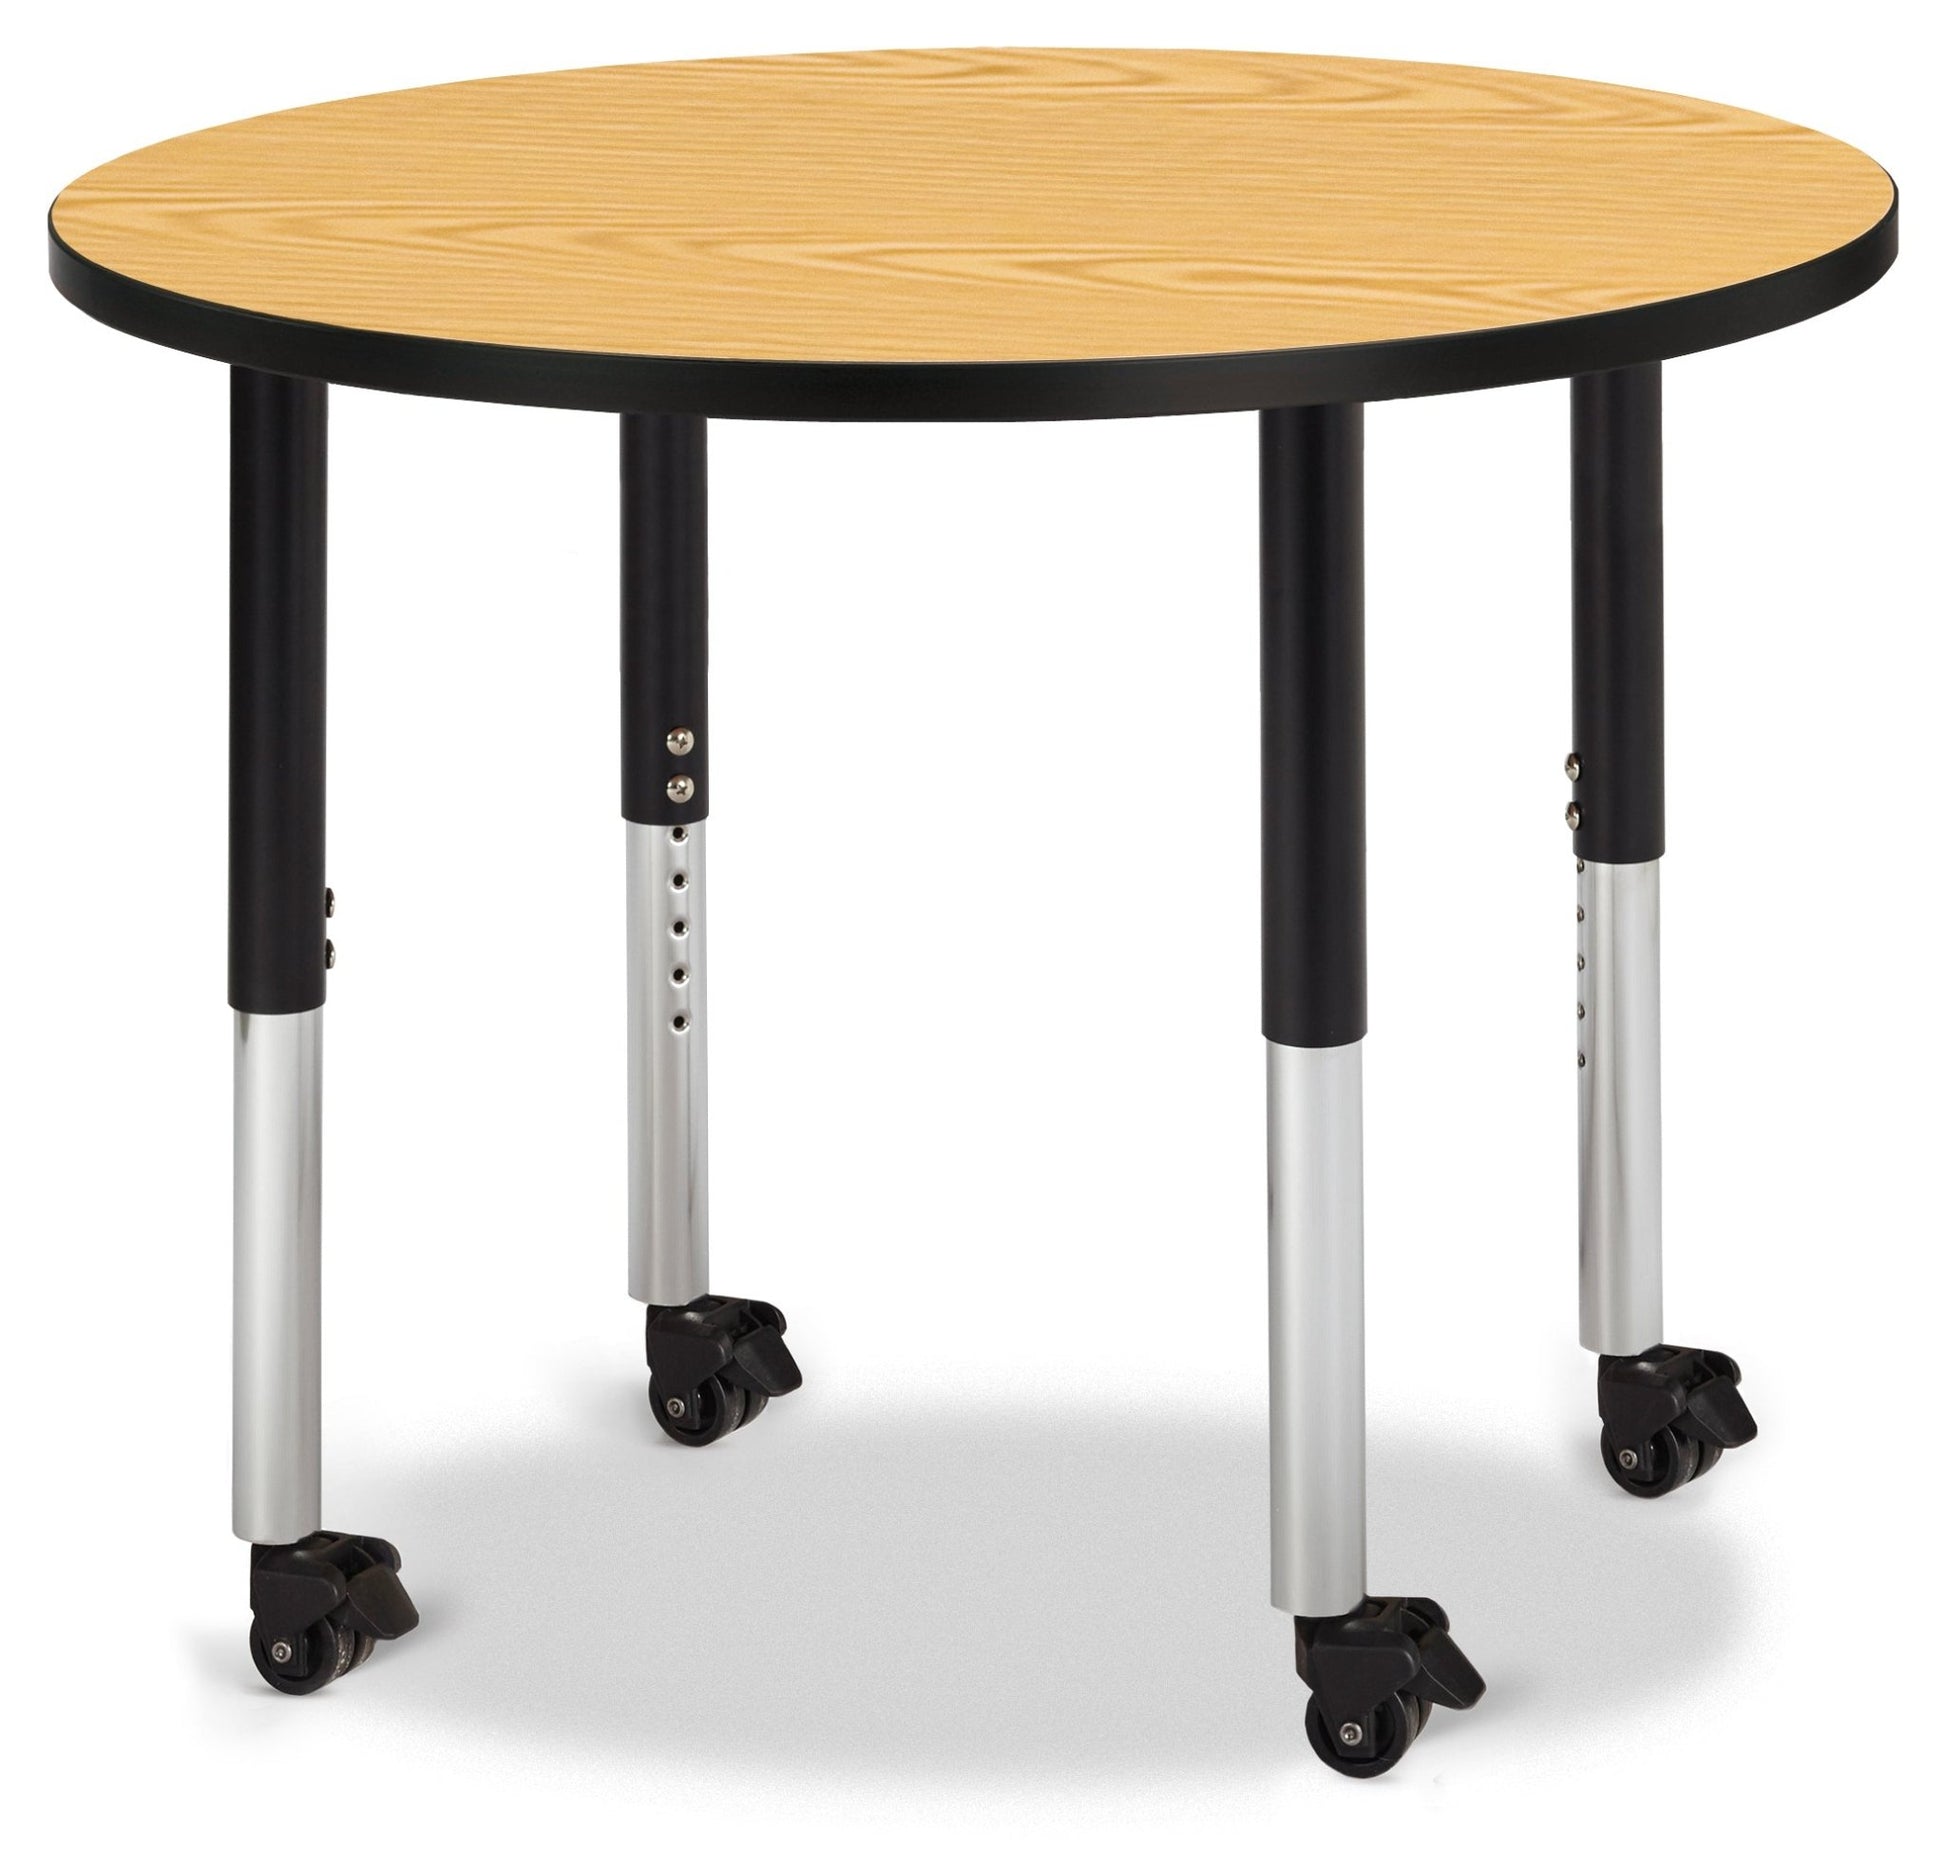 Jonti-Craft Round Activity Table with Heavy Duty Laminate Top 36" Diameter - Mobile Height Adjustable Legs (20" - 31") - SchoolOutlet